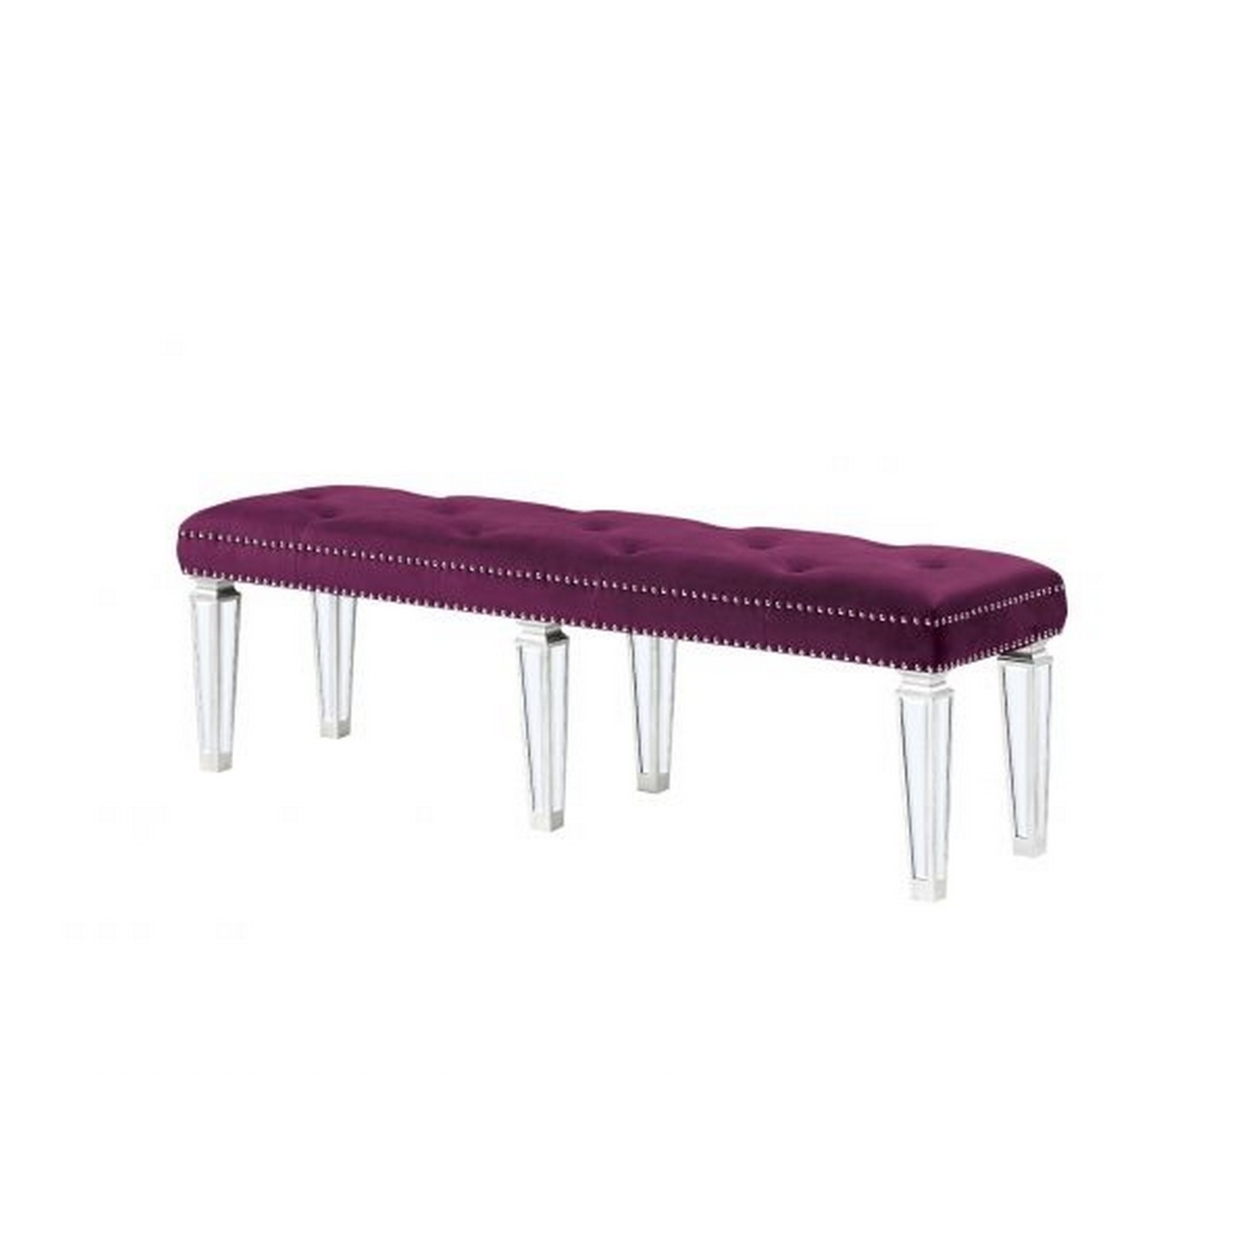 Accent Bench With Tufted Velvet Seat And Mirrored Legs, Purple- Saltoro Sherpi